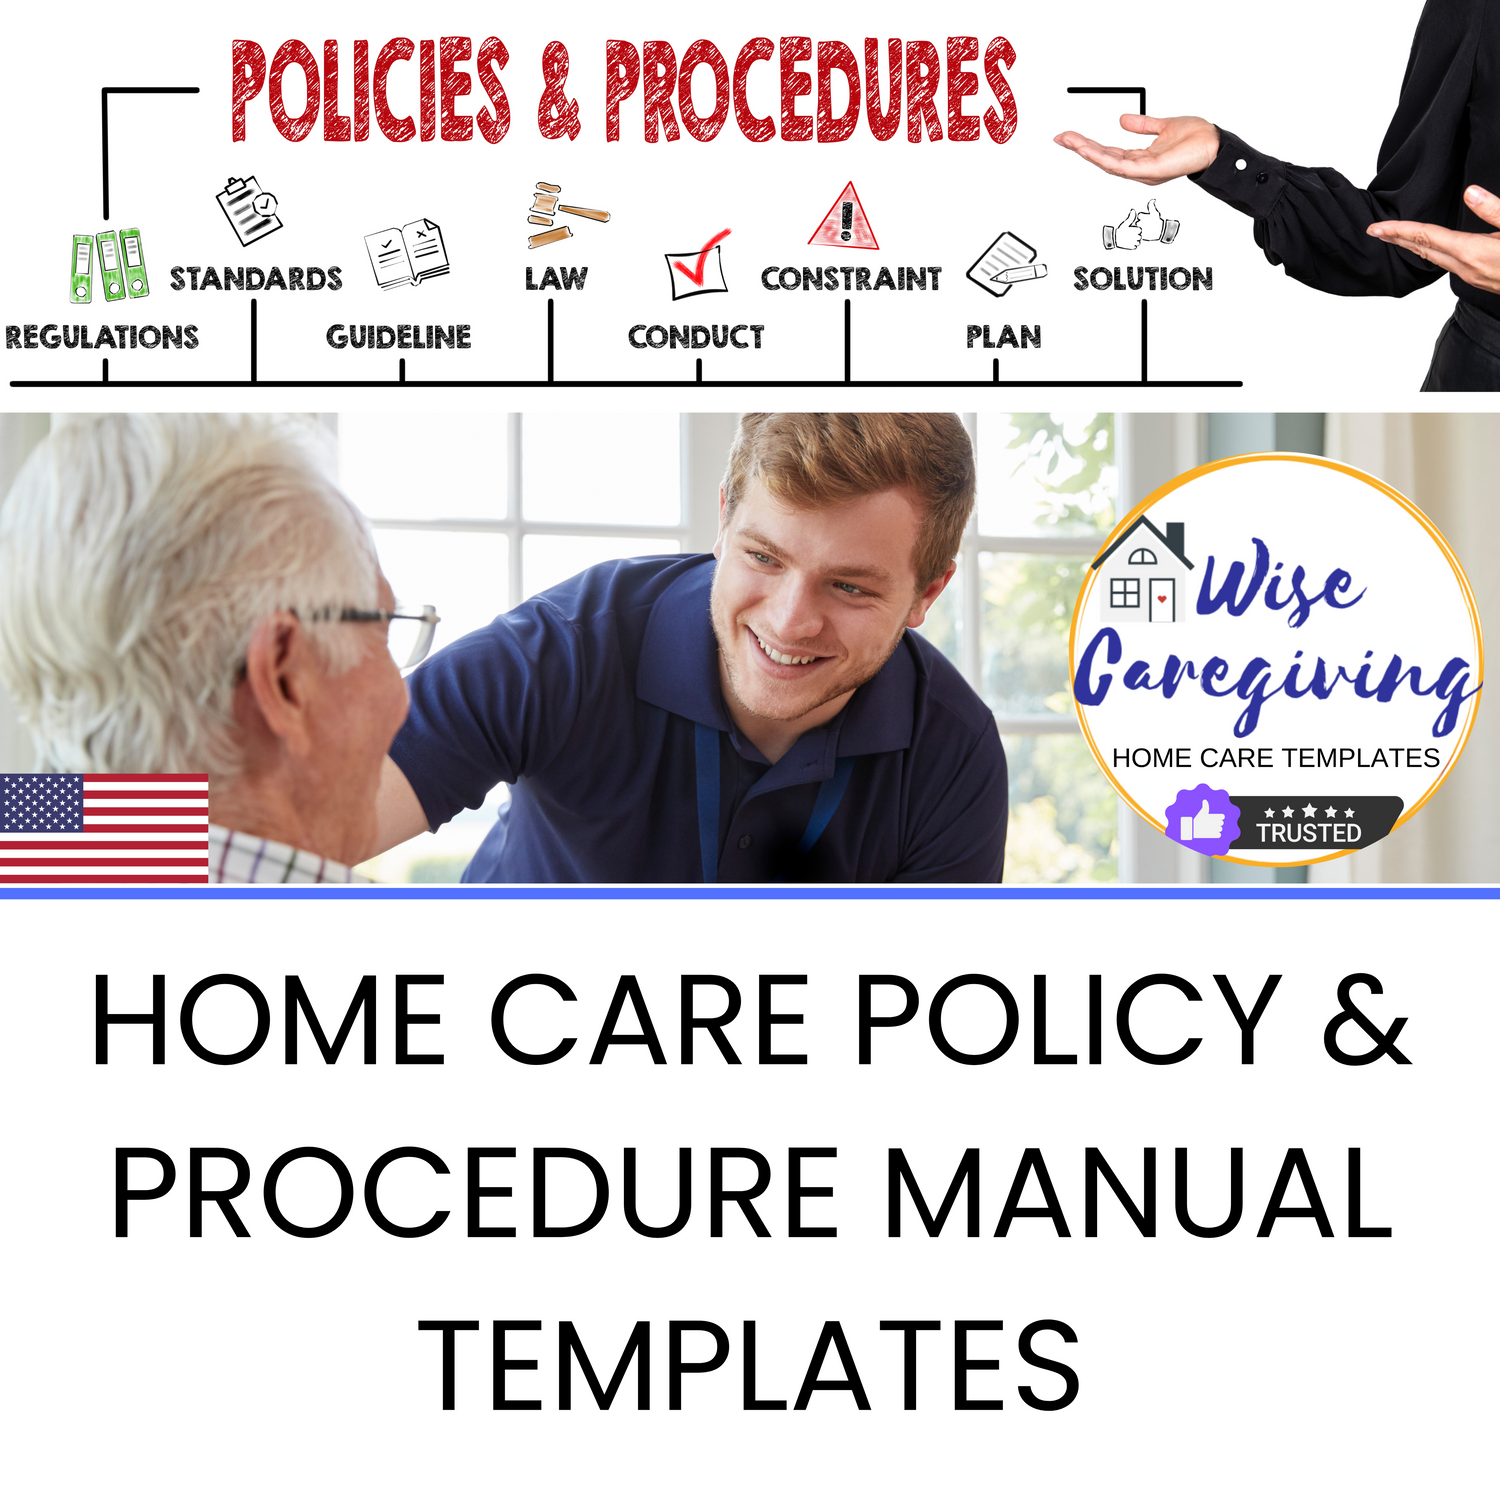 Home Care Policy & Procedure Manual Templates